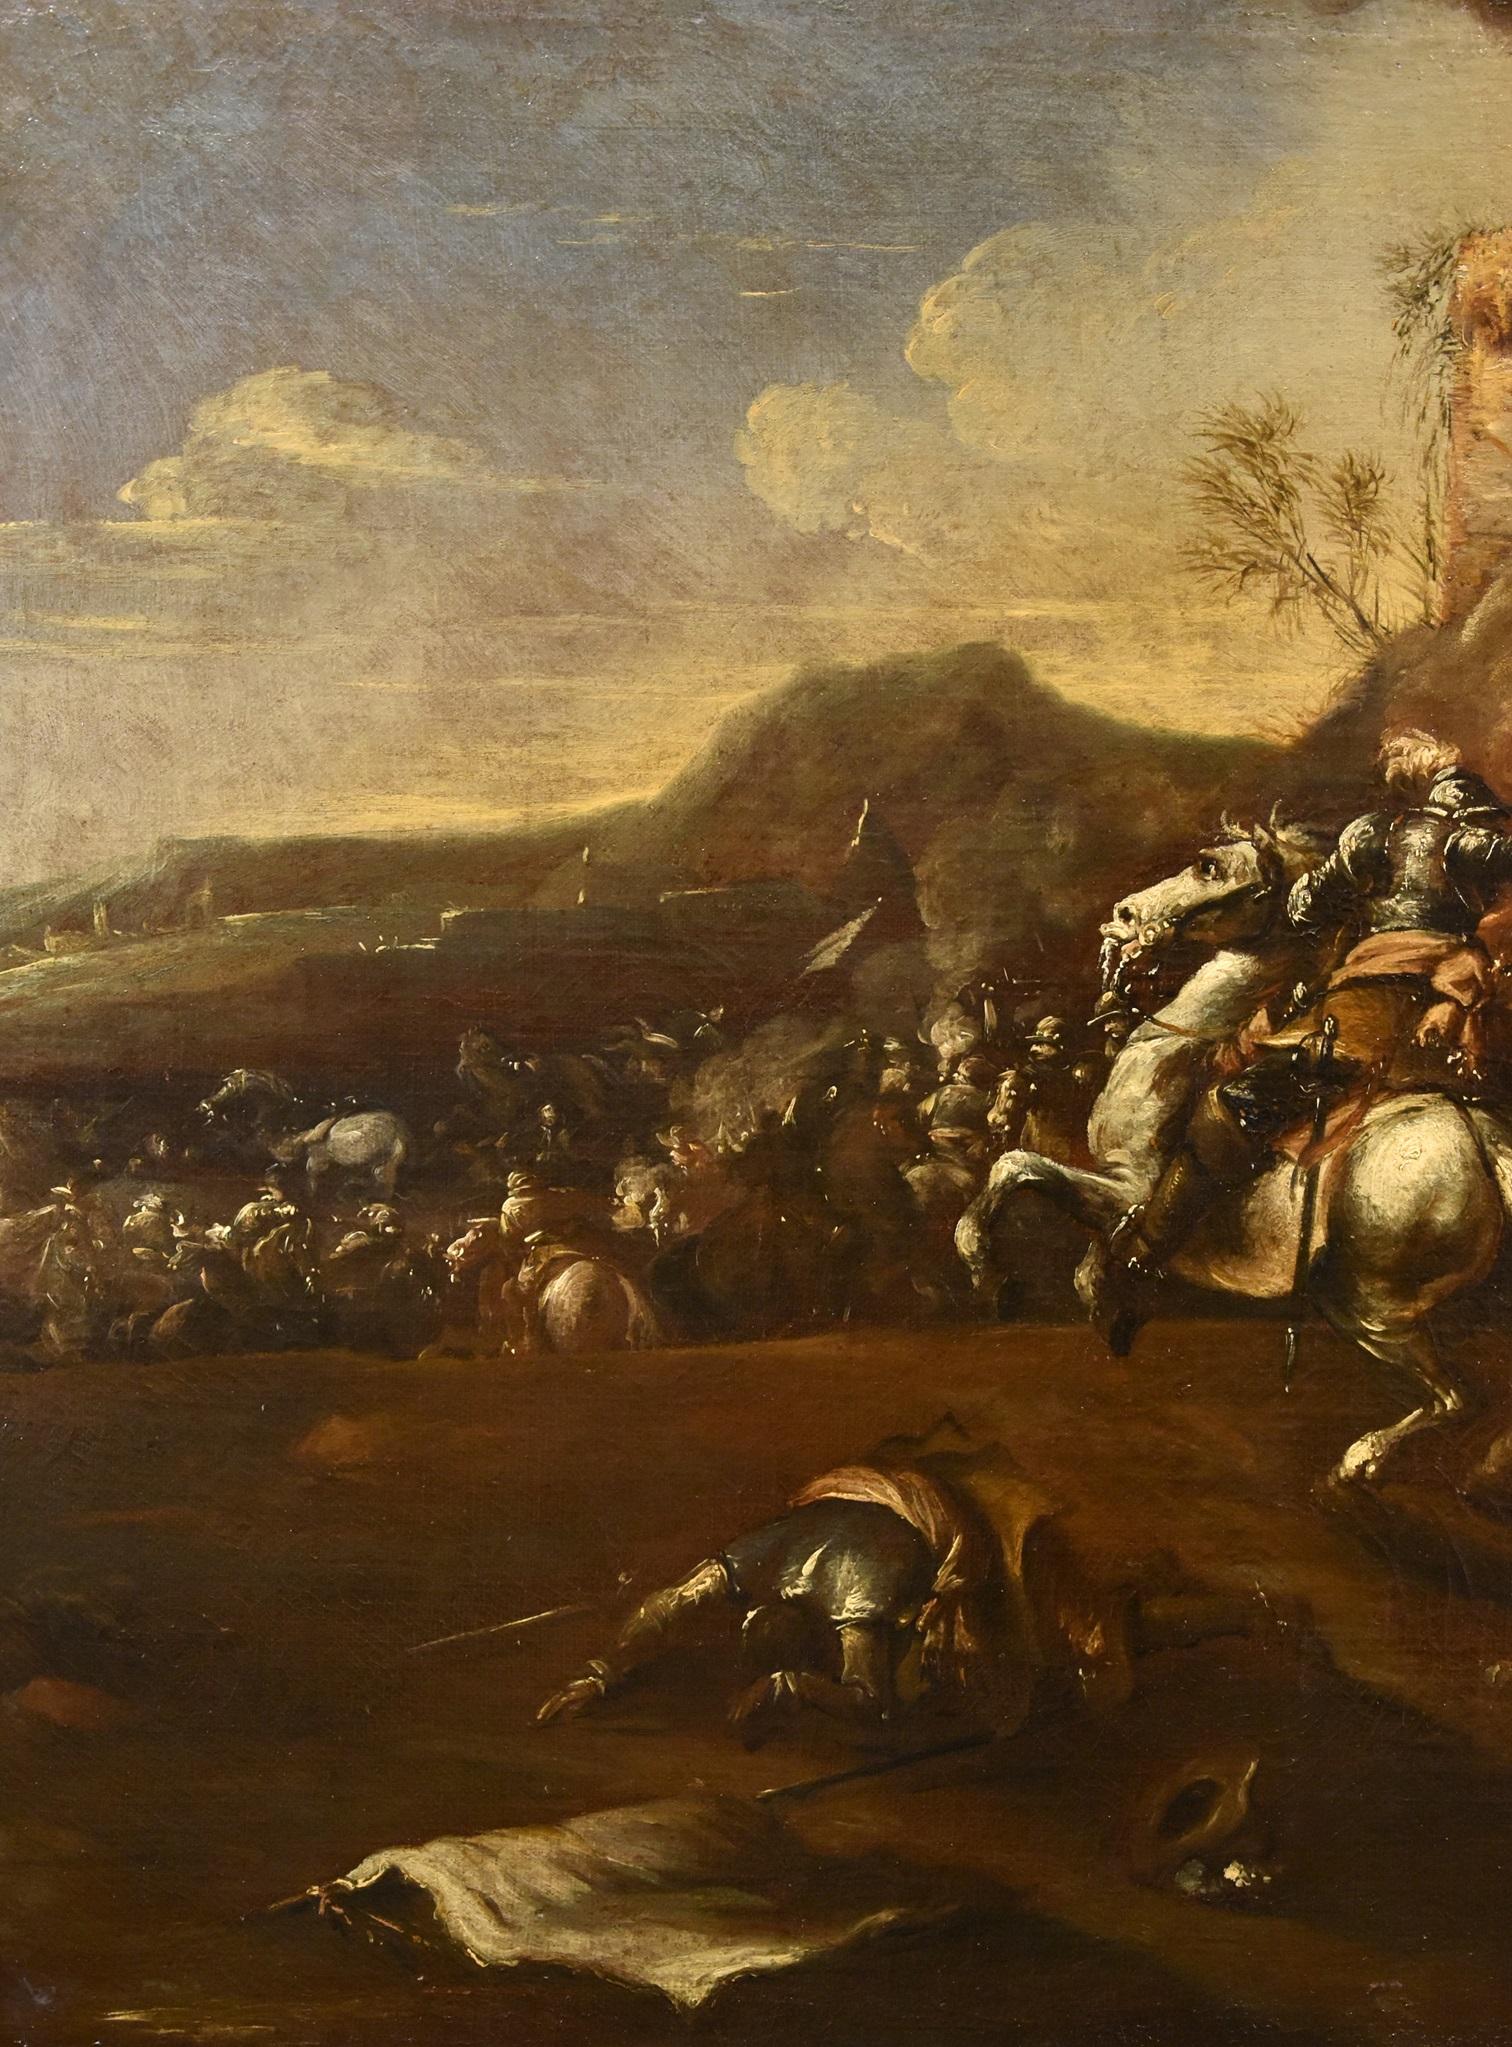 Francesco Graziani, known as Ciccio Napoletano
(active in Naples and Rome in the second half of the 17th century)

Battle with clash of horsemen

Oil on canvas
95 x 130 cm
In period frame cm. 114 x 148

Expertise E. Negro

This interesting painting